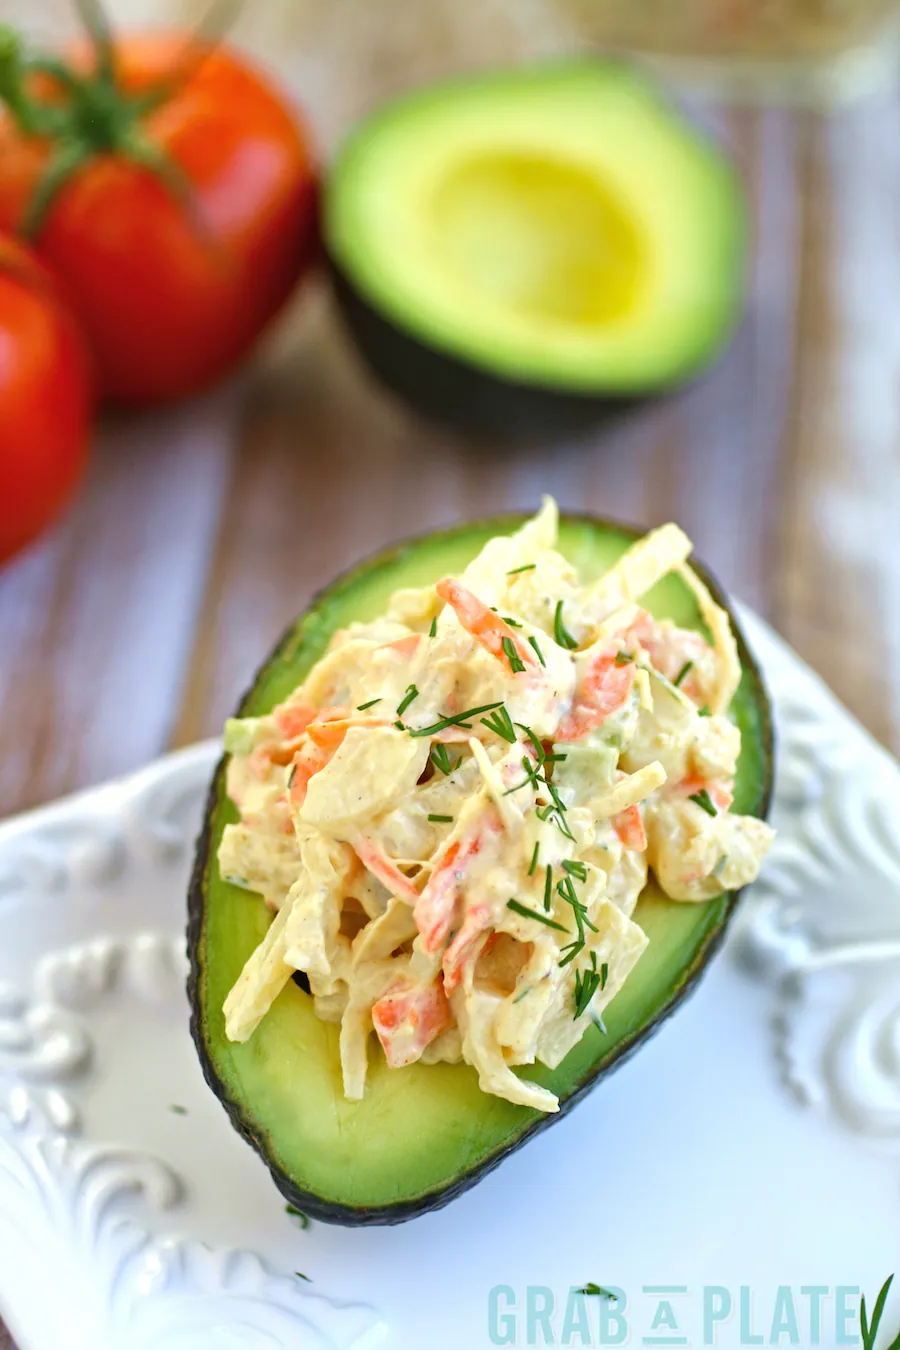 Avocado-stuffed-hearts-of-palm-crabless-salad